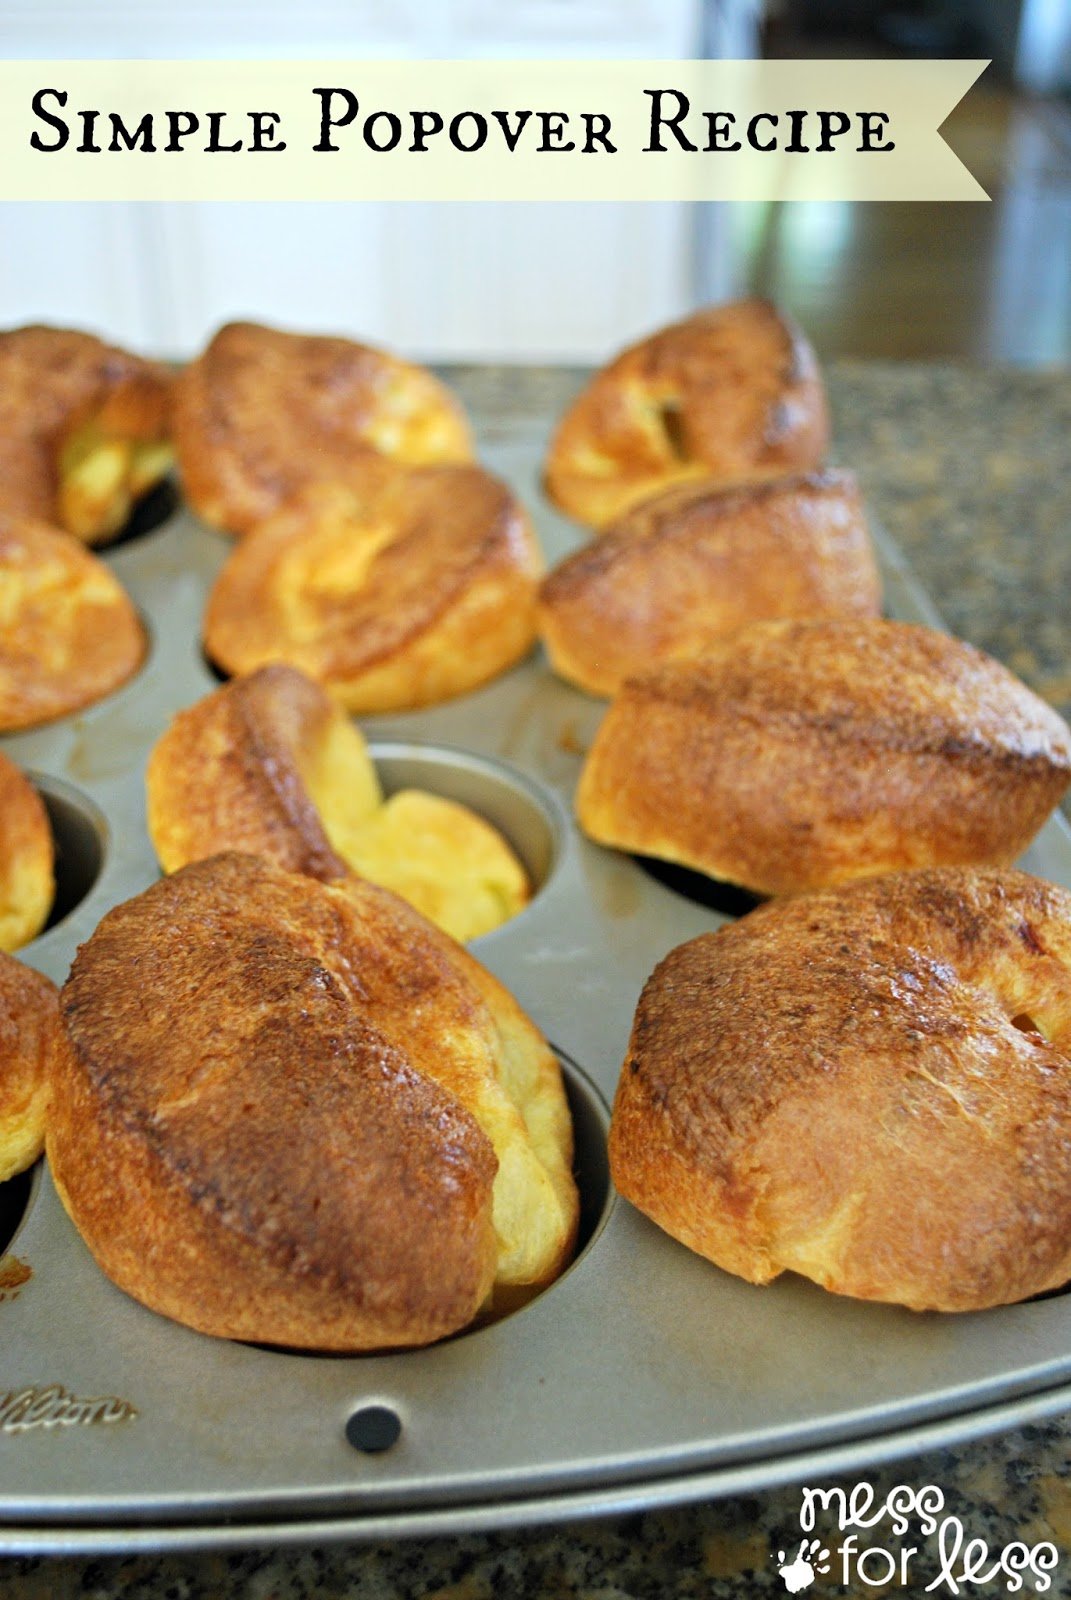 Simple Popover Recipe - Just a few basic ingredients are all you need to make this light and fluffy breakfast treat.